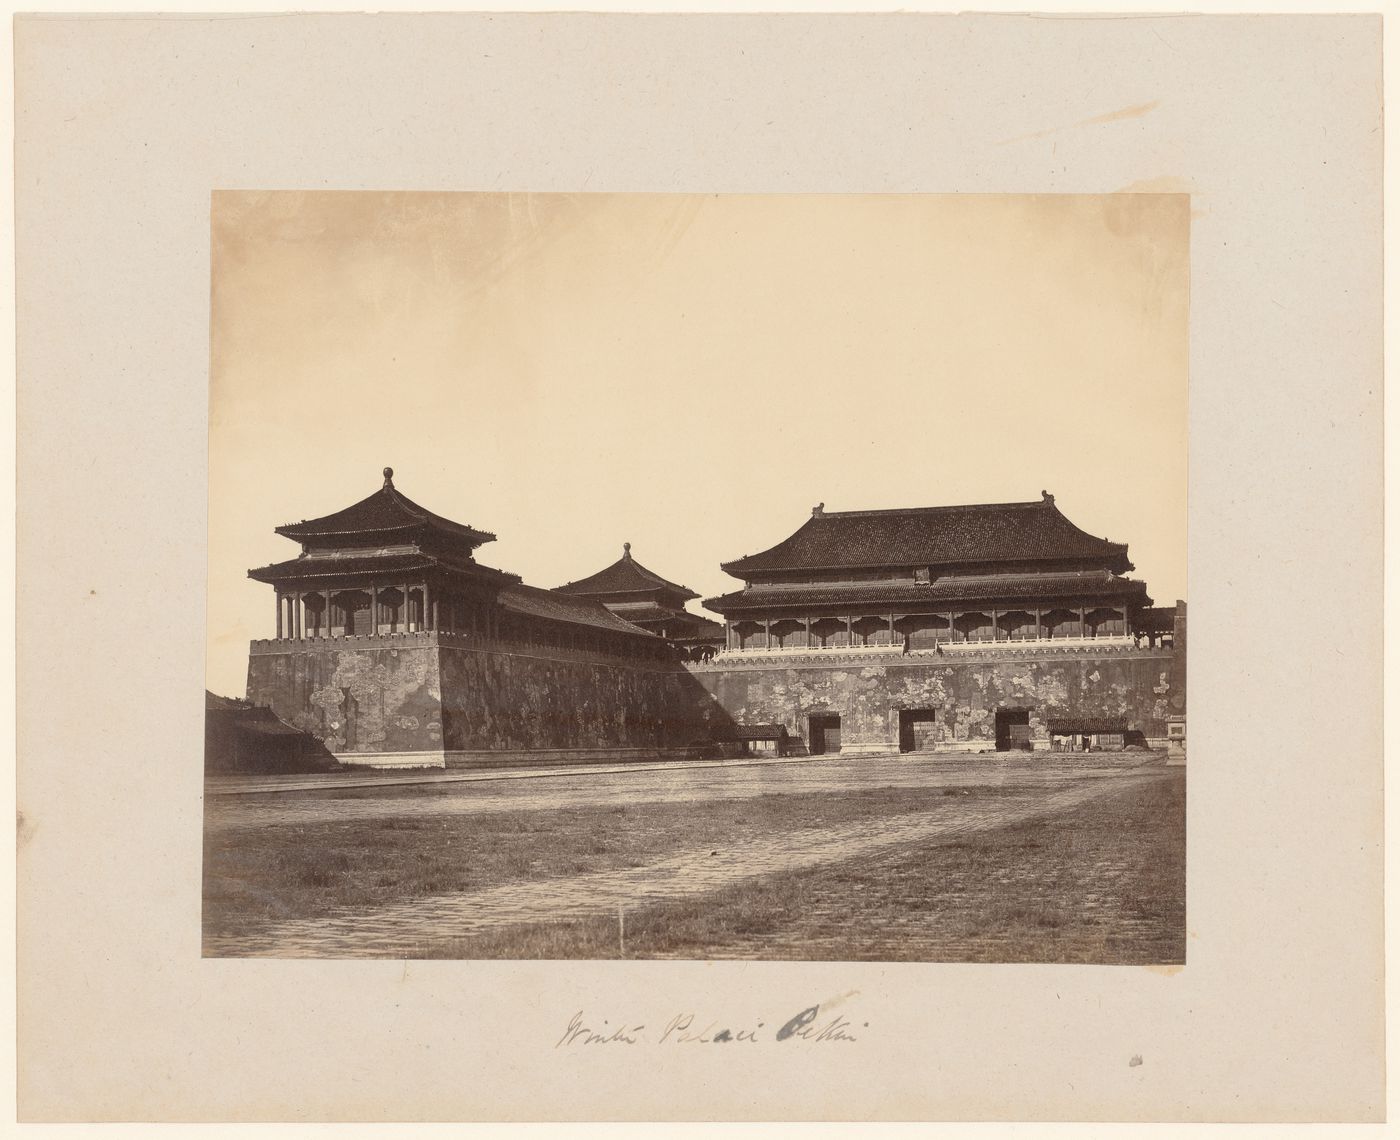 View of the Meridian Gate [Wumen] to the Forbidden City (also known as the Imperial Palace), Peking (now Beijing), China